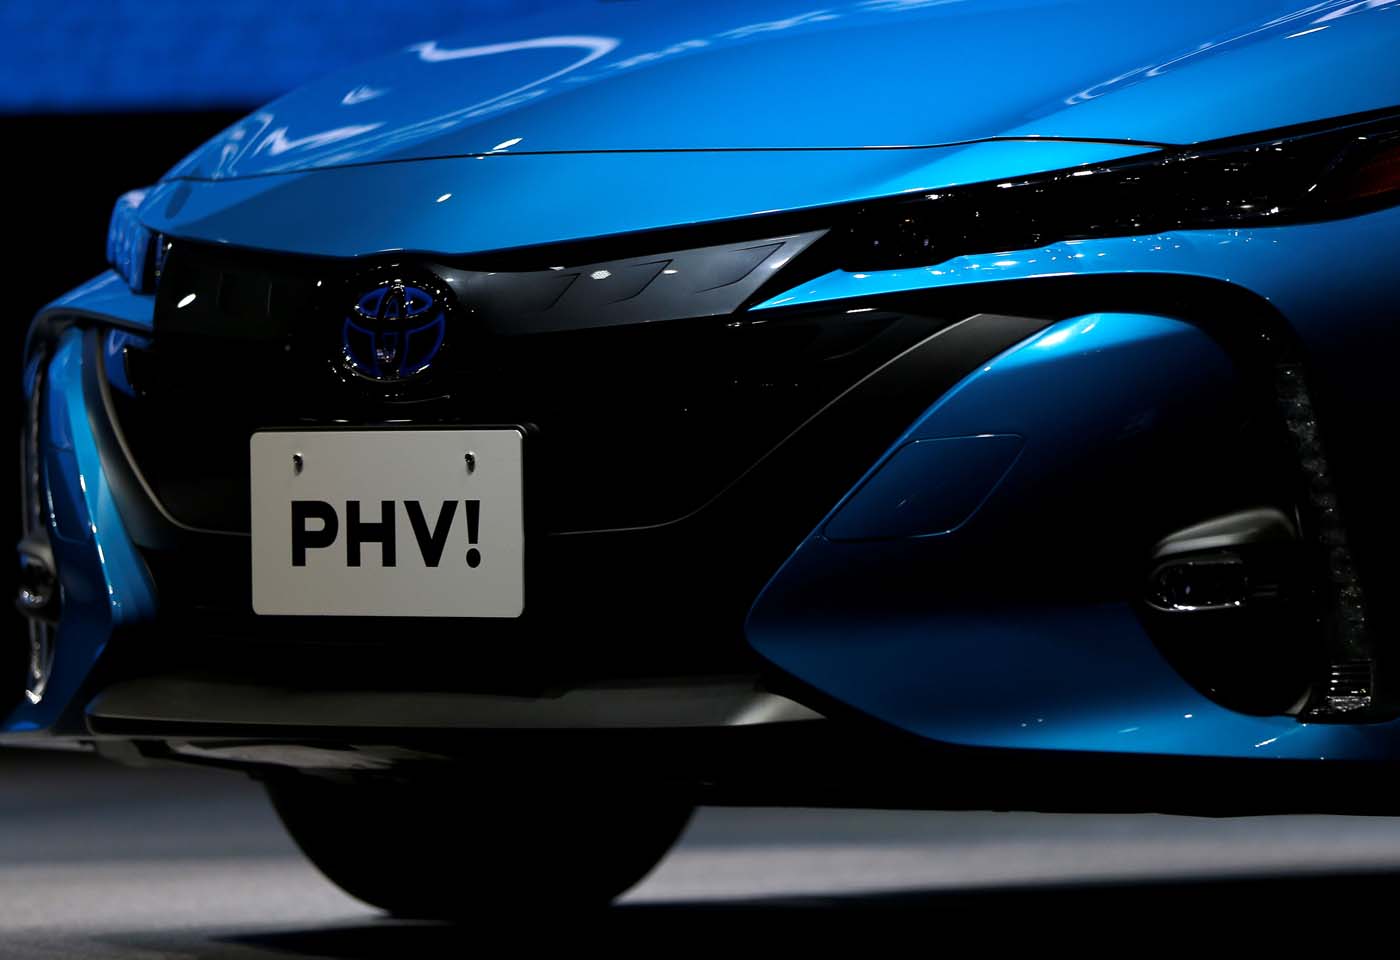 Toyota Motor Corp. displays the company's Prius PHV Plug-in-Hybrid vehicle, also known as Prius Prime in the U.S., during an event to mark the launch of the car in Japan, in Tokyo, Japan February 15, 2017. REUTERS/Issei Kato